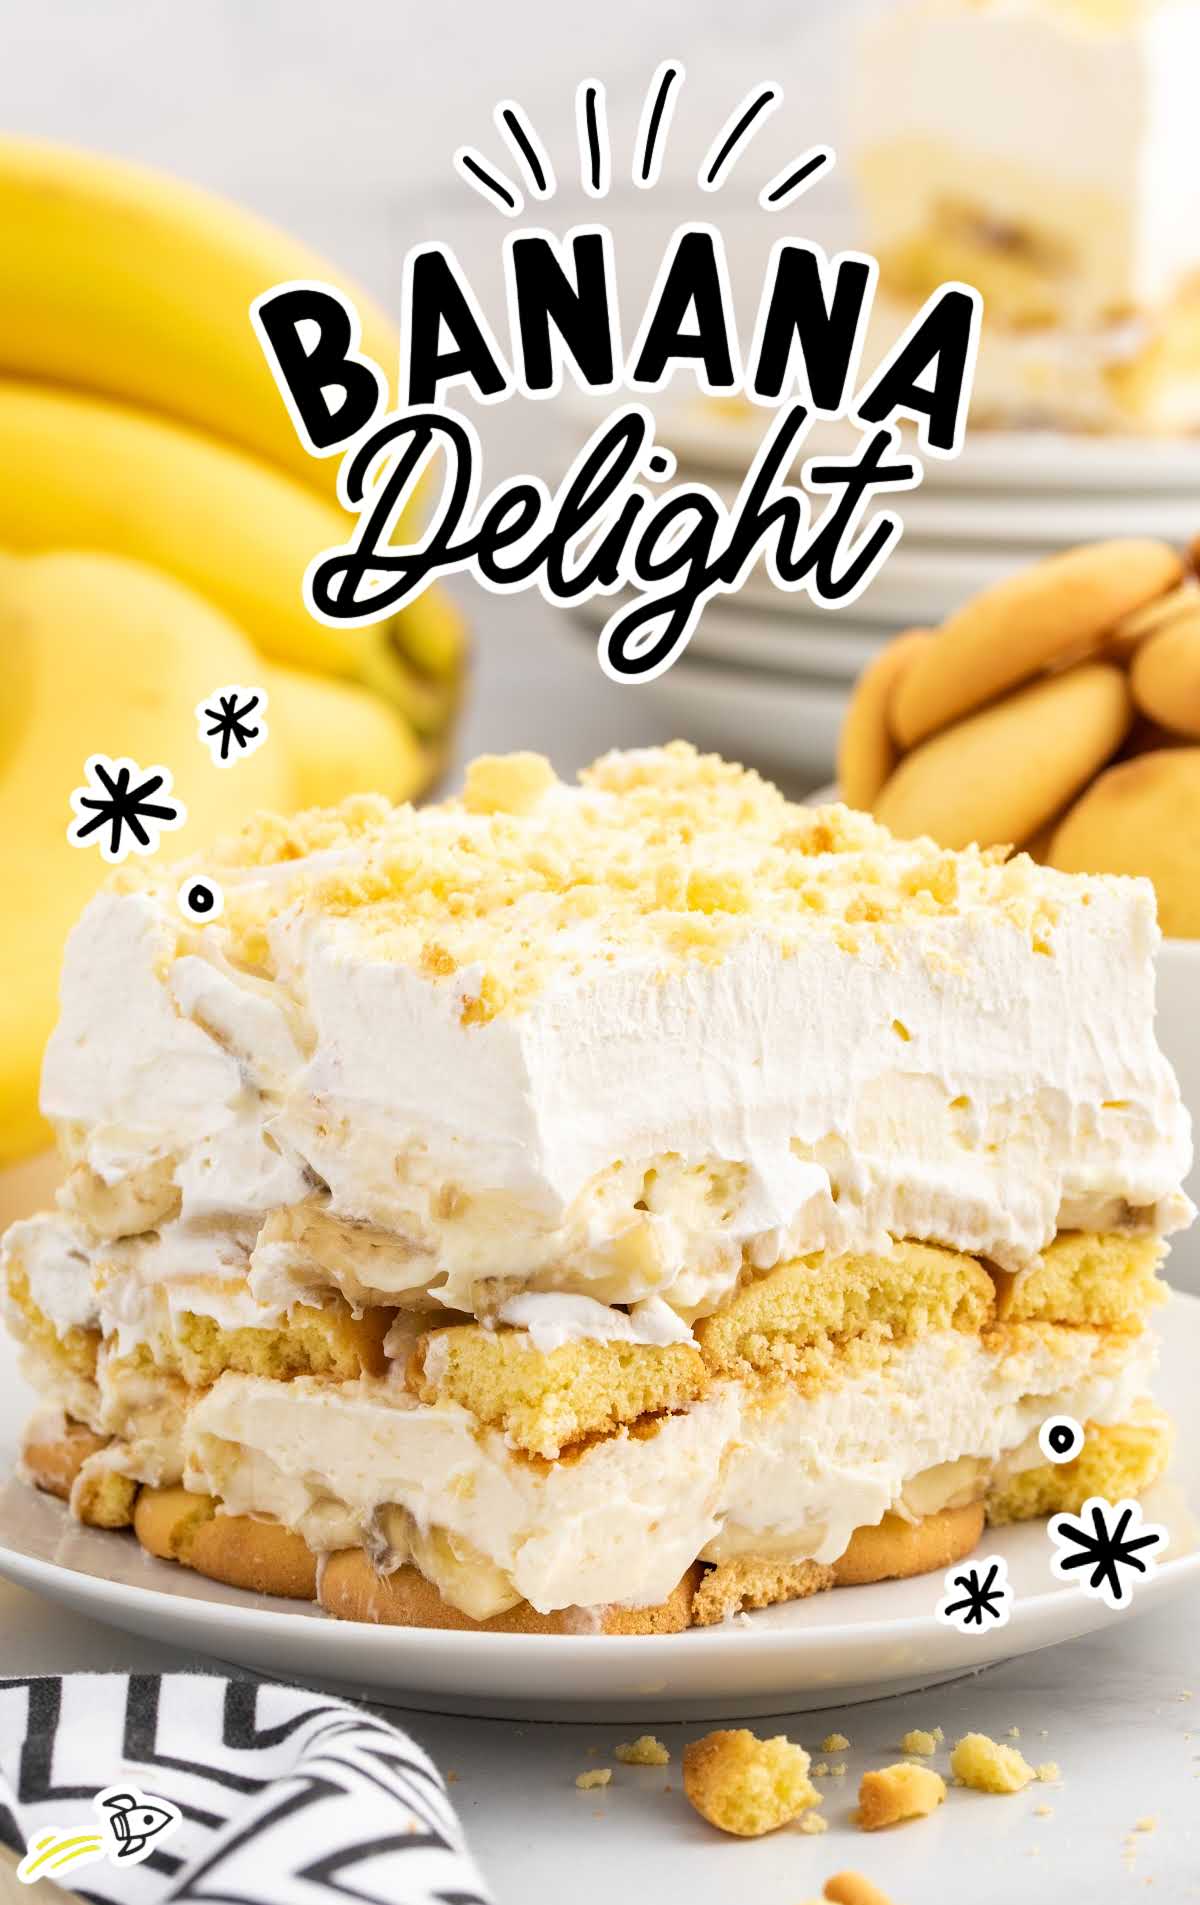 a close up shot of a slice of Banana Delight on a plate